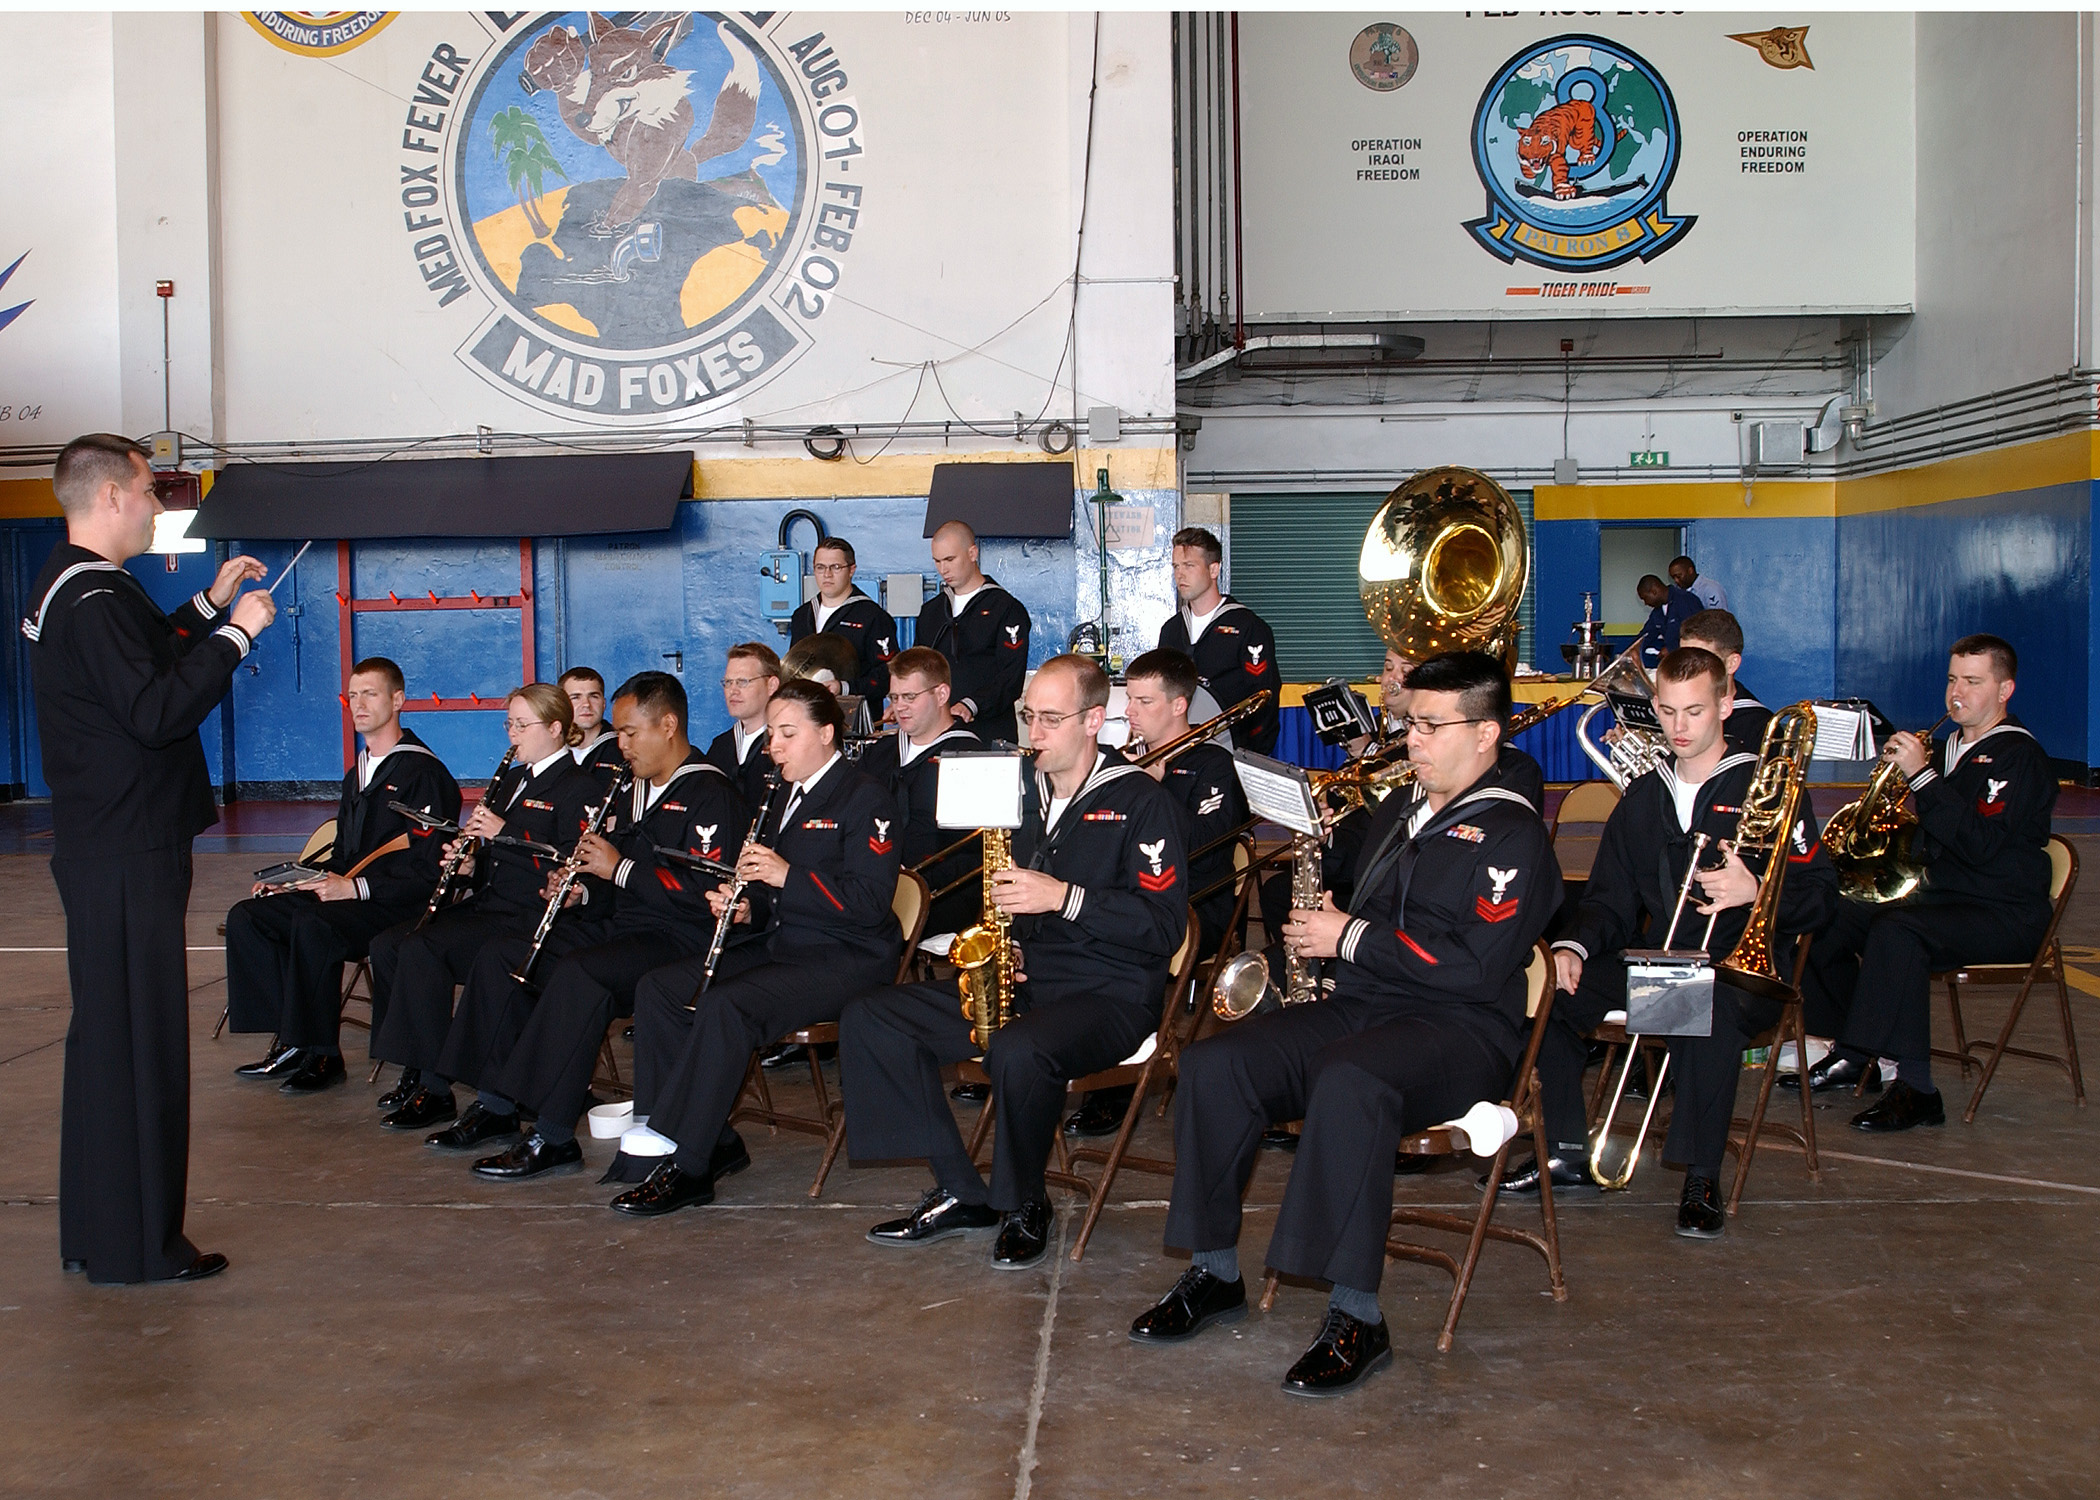 US Navy 050418-N-1550W-002 A U.S. Navy band plays at the change of command ceremony for Patrol Squadron Five (VP-5)